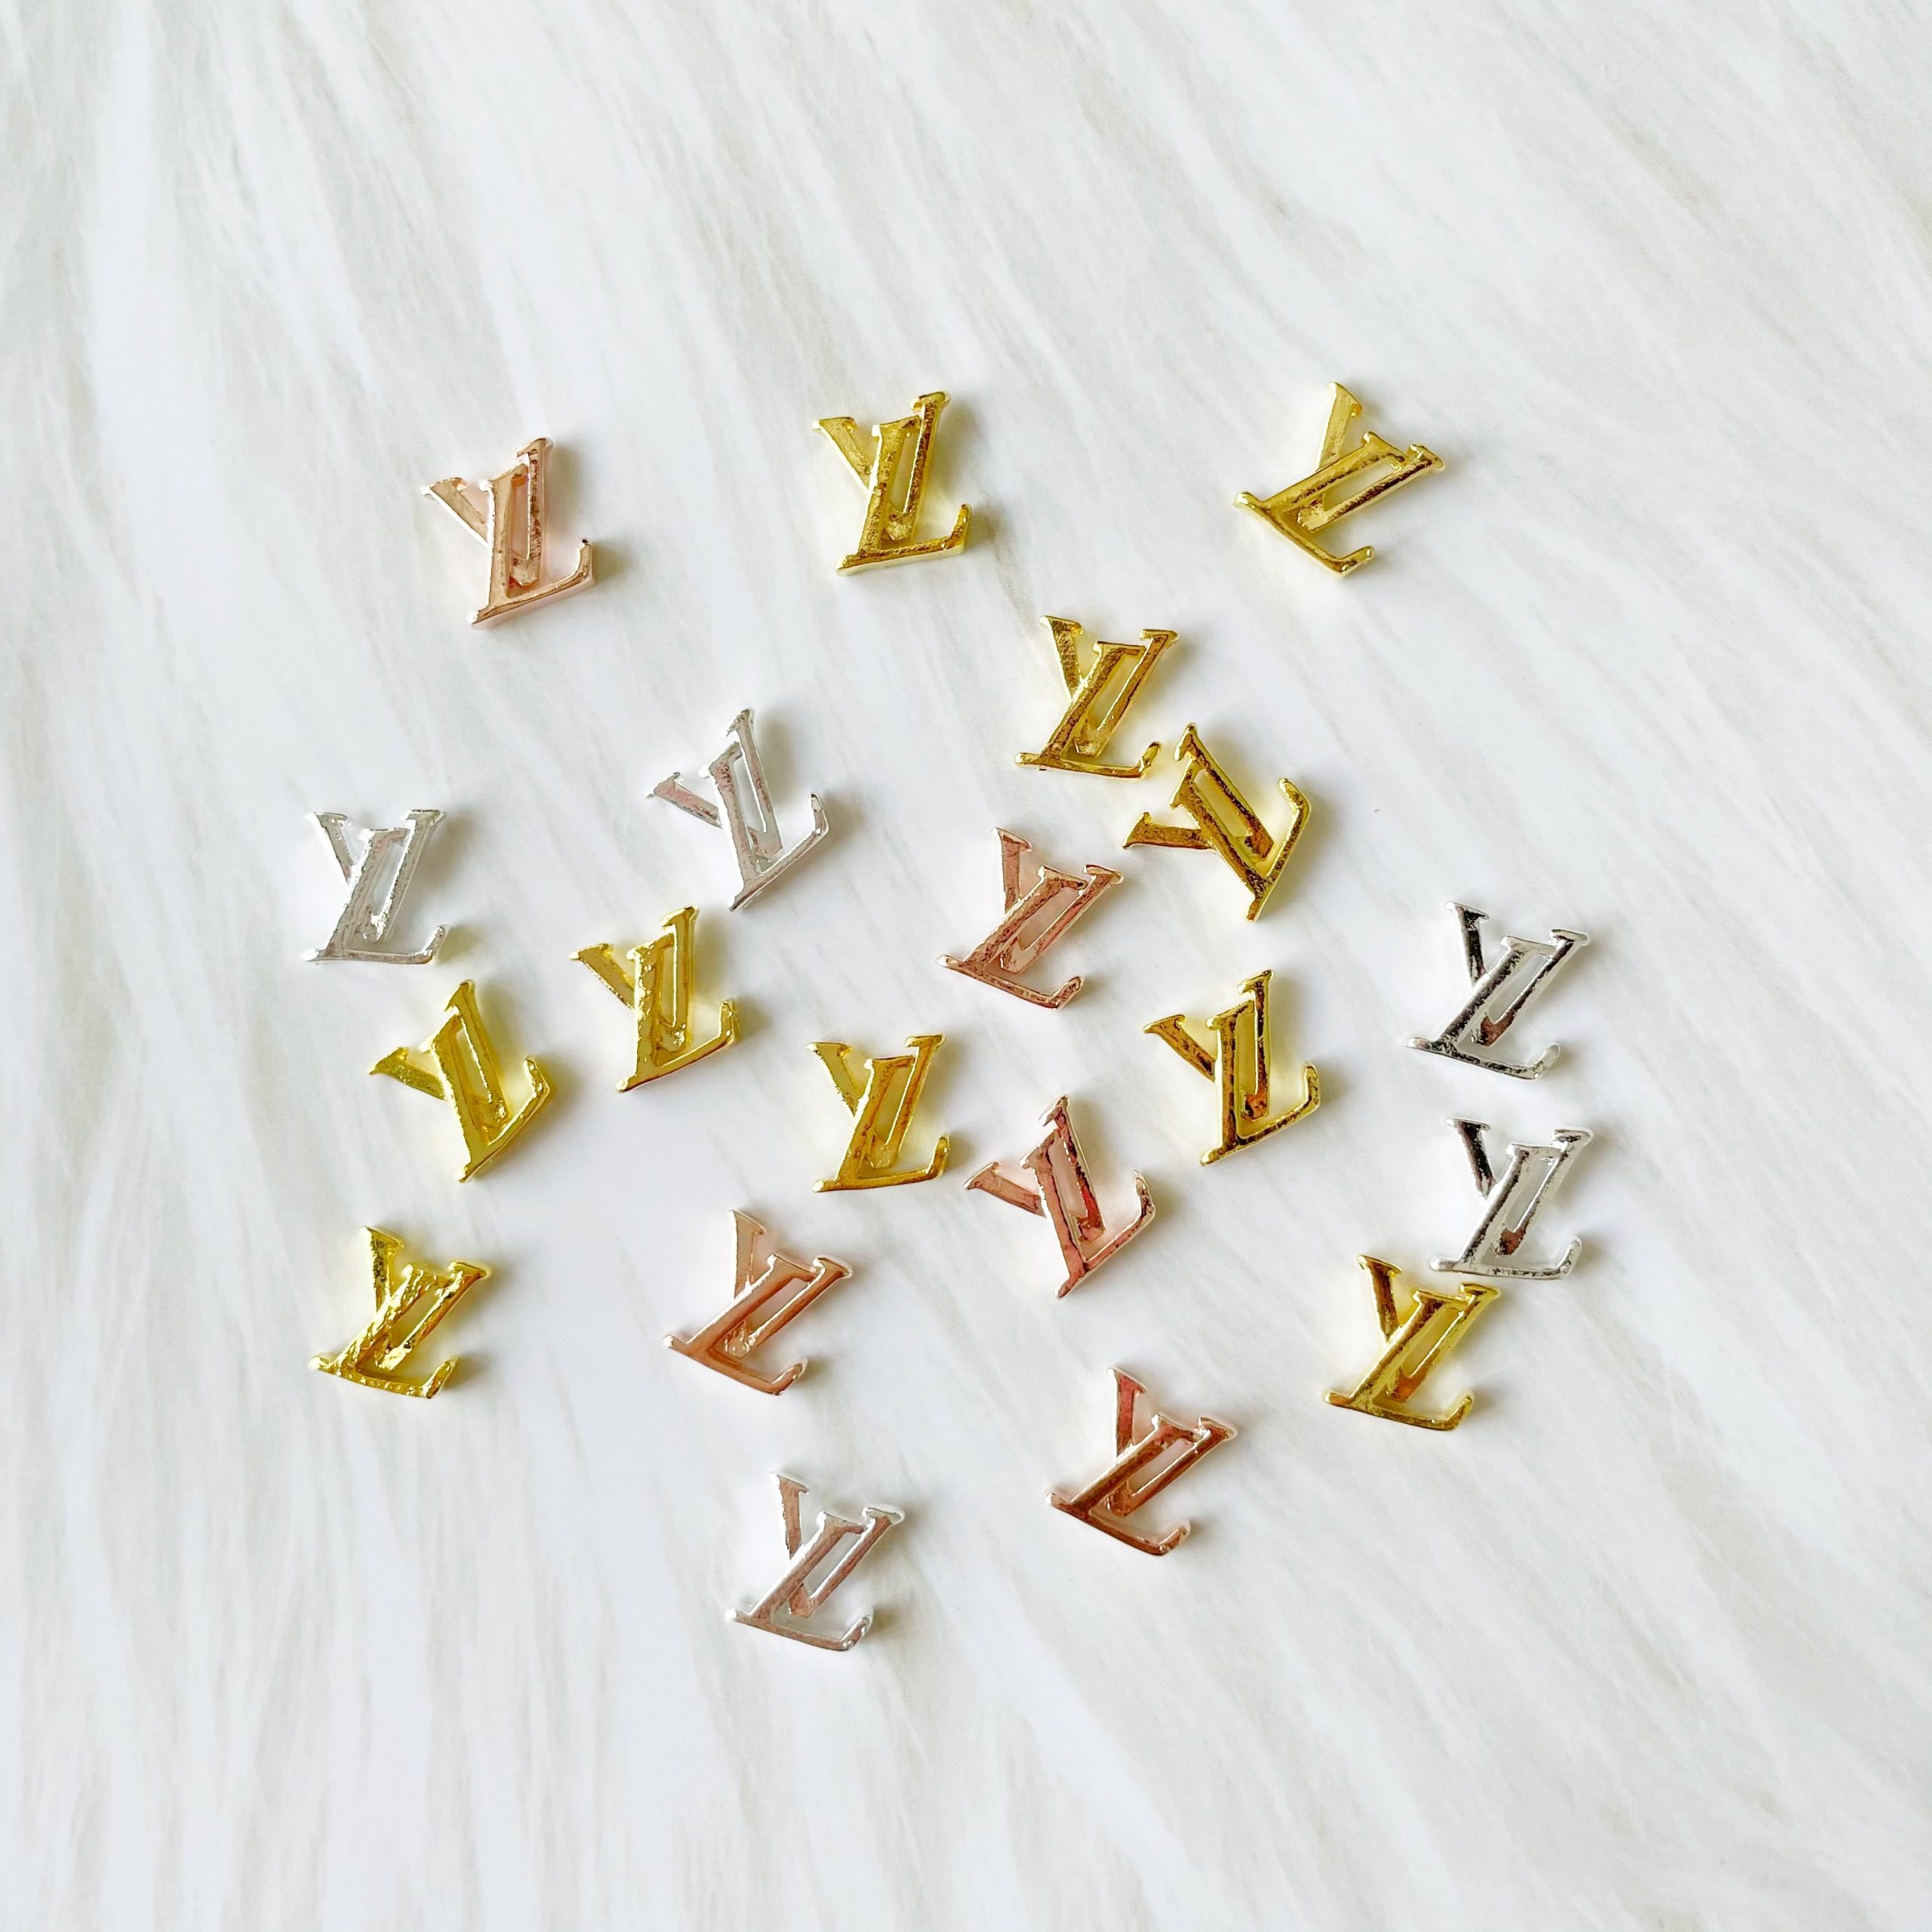 Shop Your Favorite LV Nail Charms